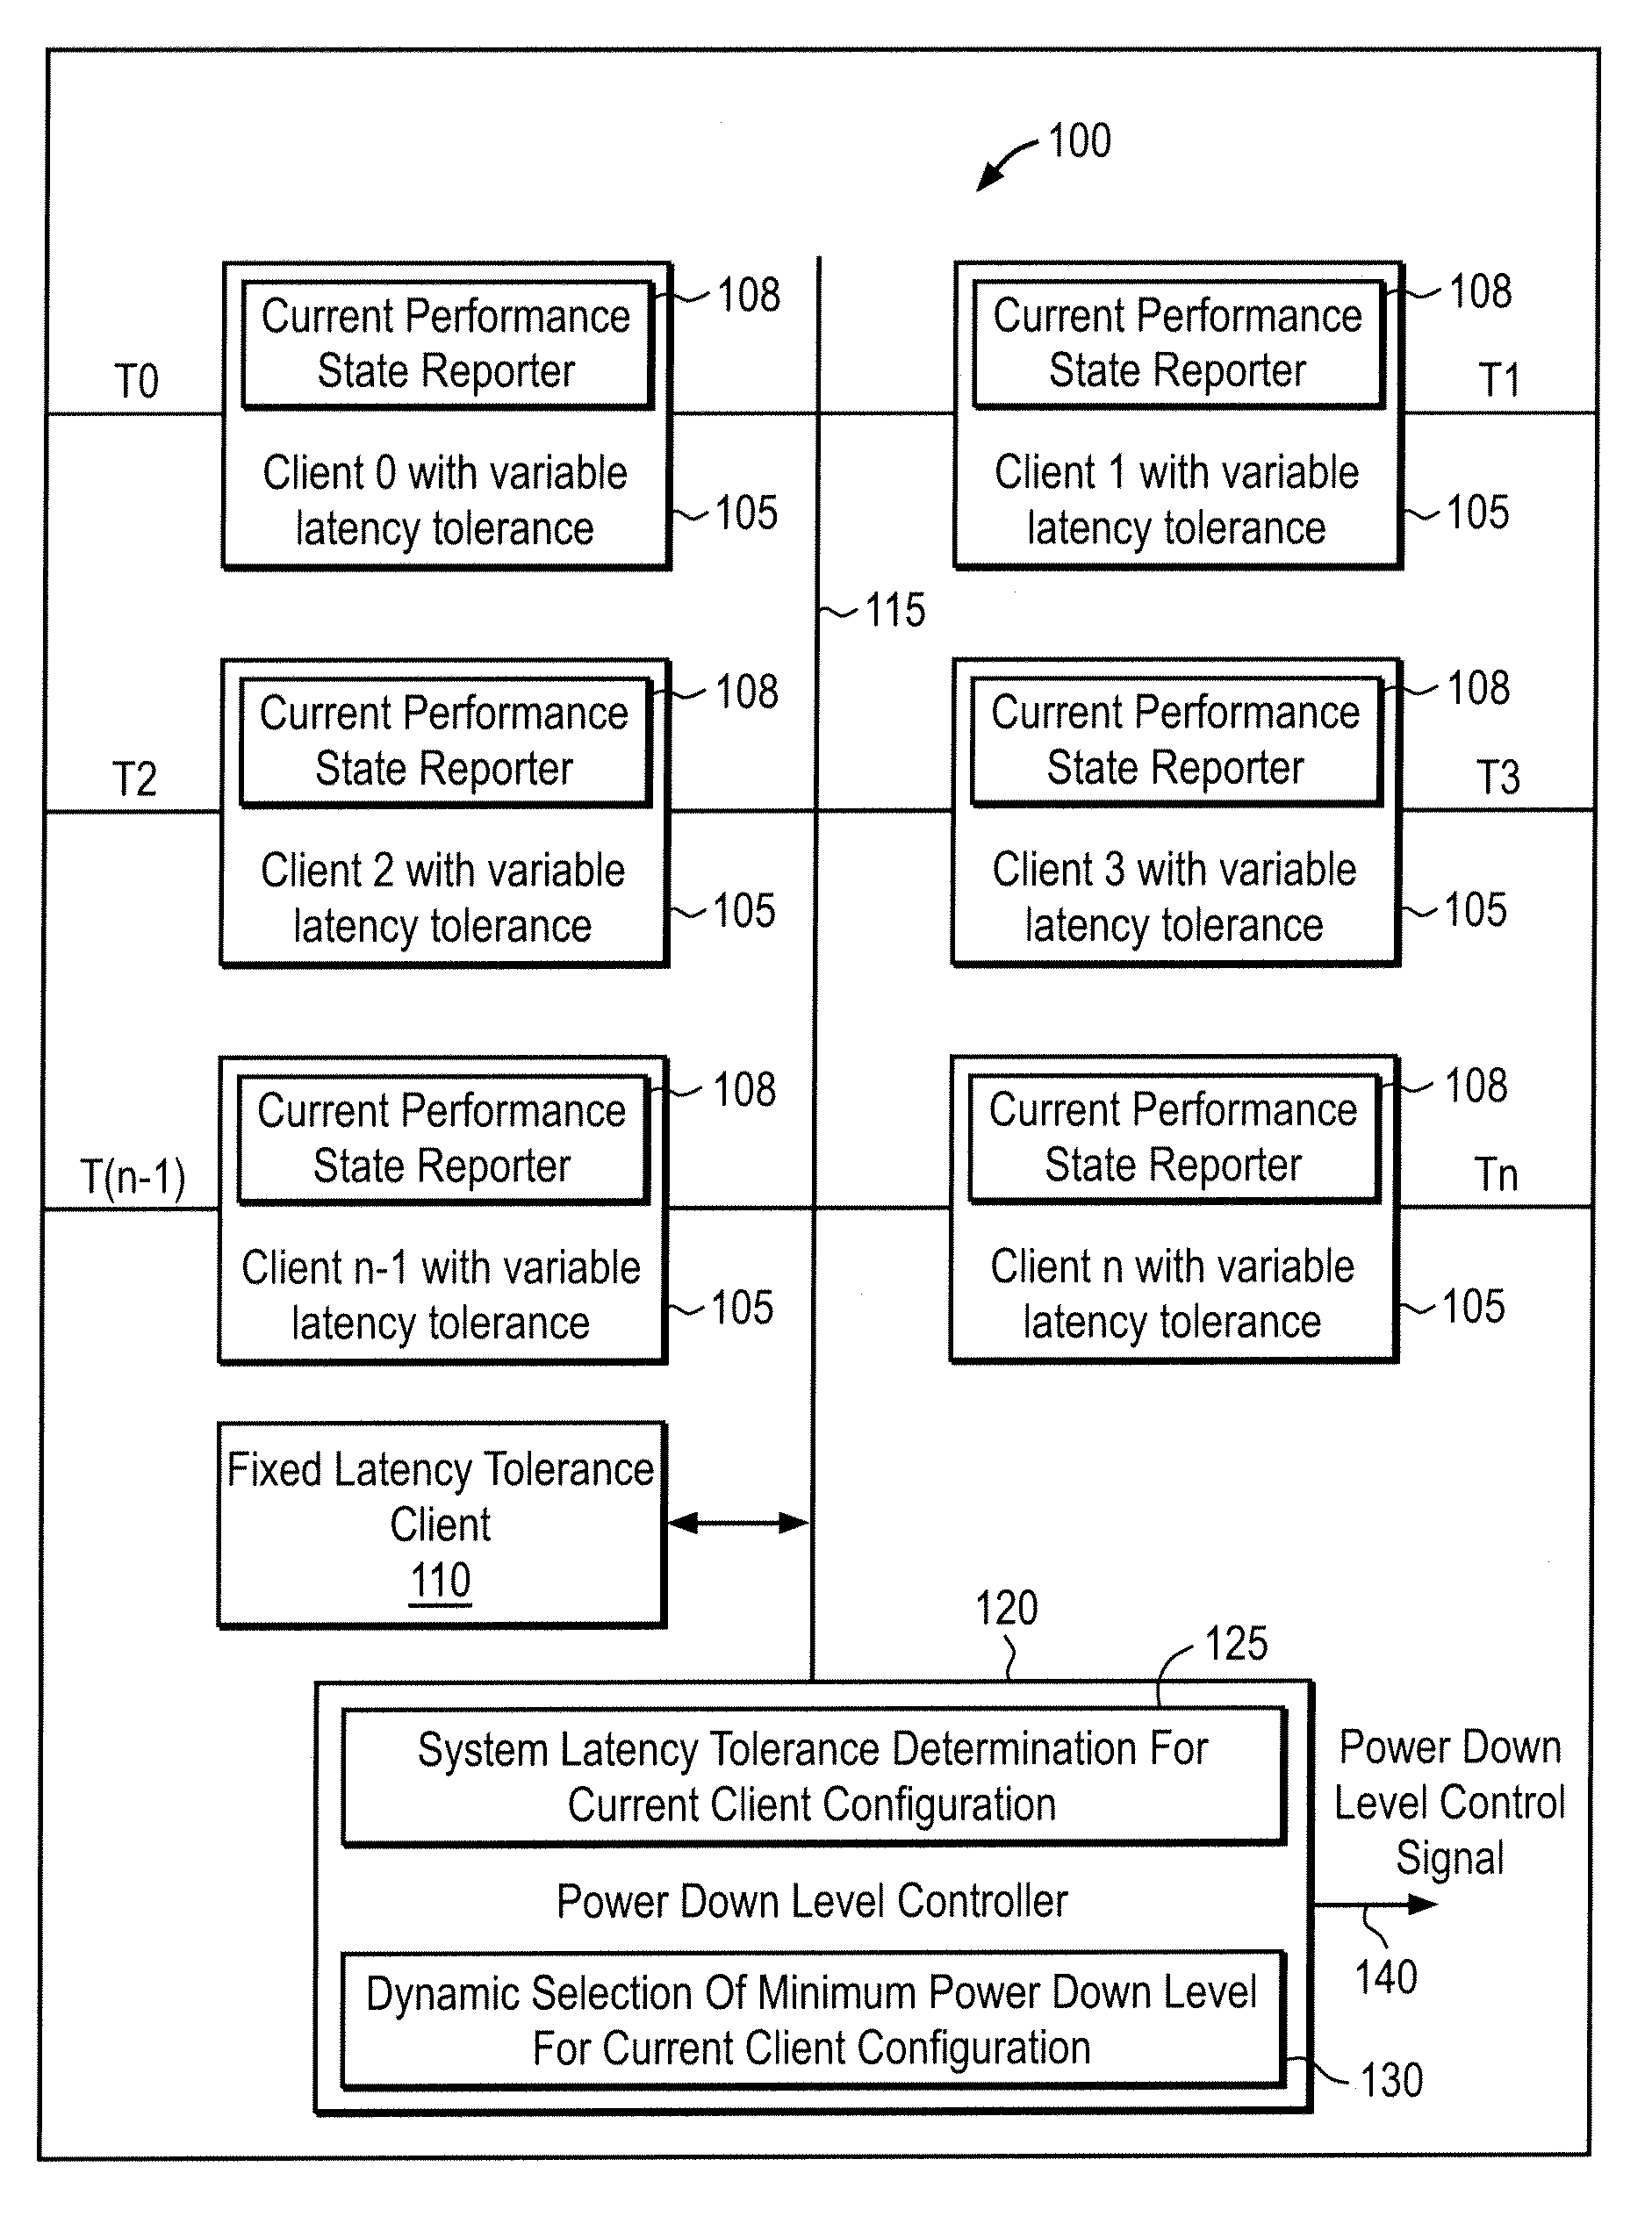 Apparatus, method, and system for dynamically selecting power down level